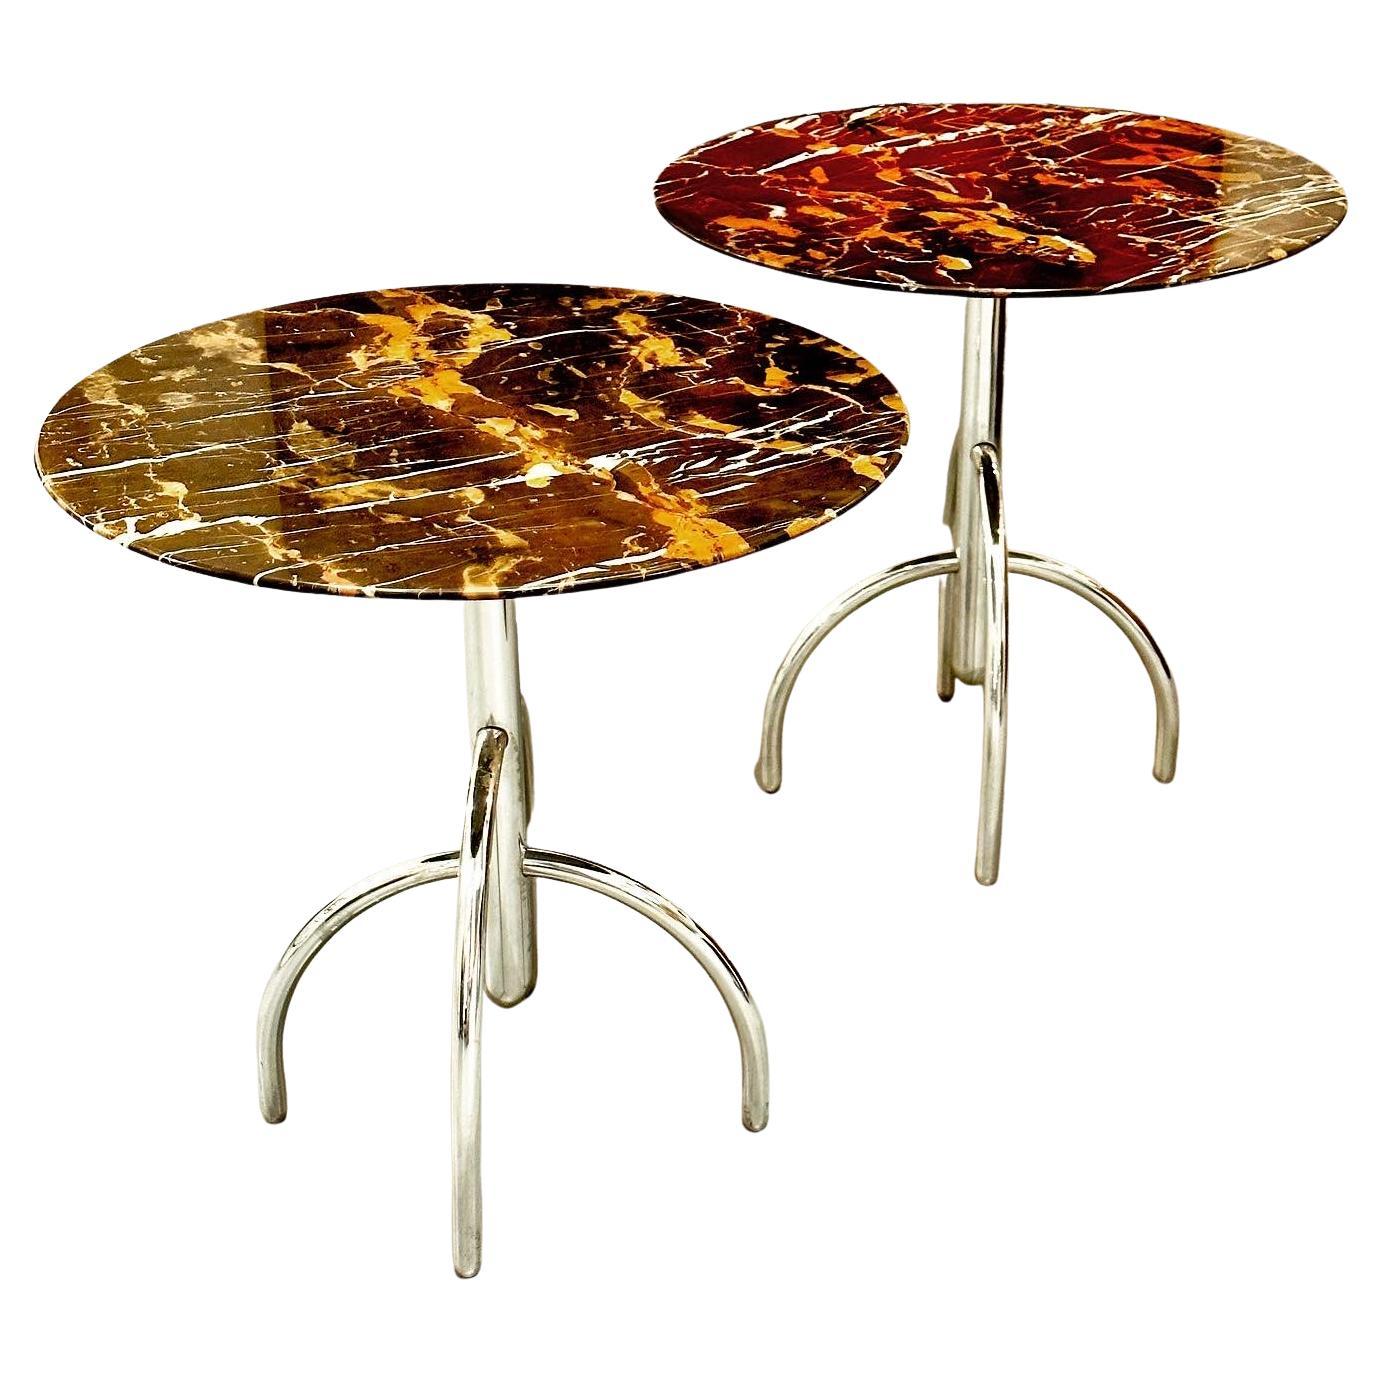 Lawrence Laske for Knoll Pair Saguaro Cactus Marble Top Side Tables, ca 1993